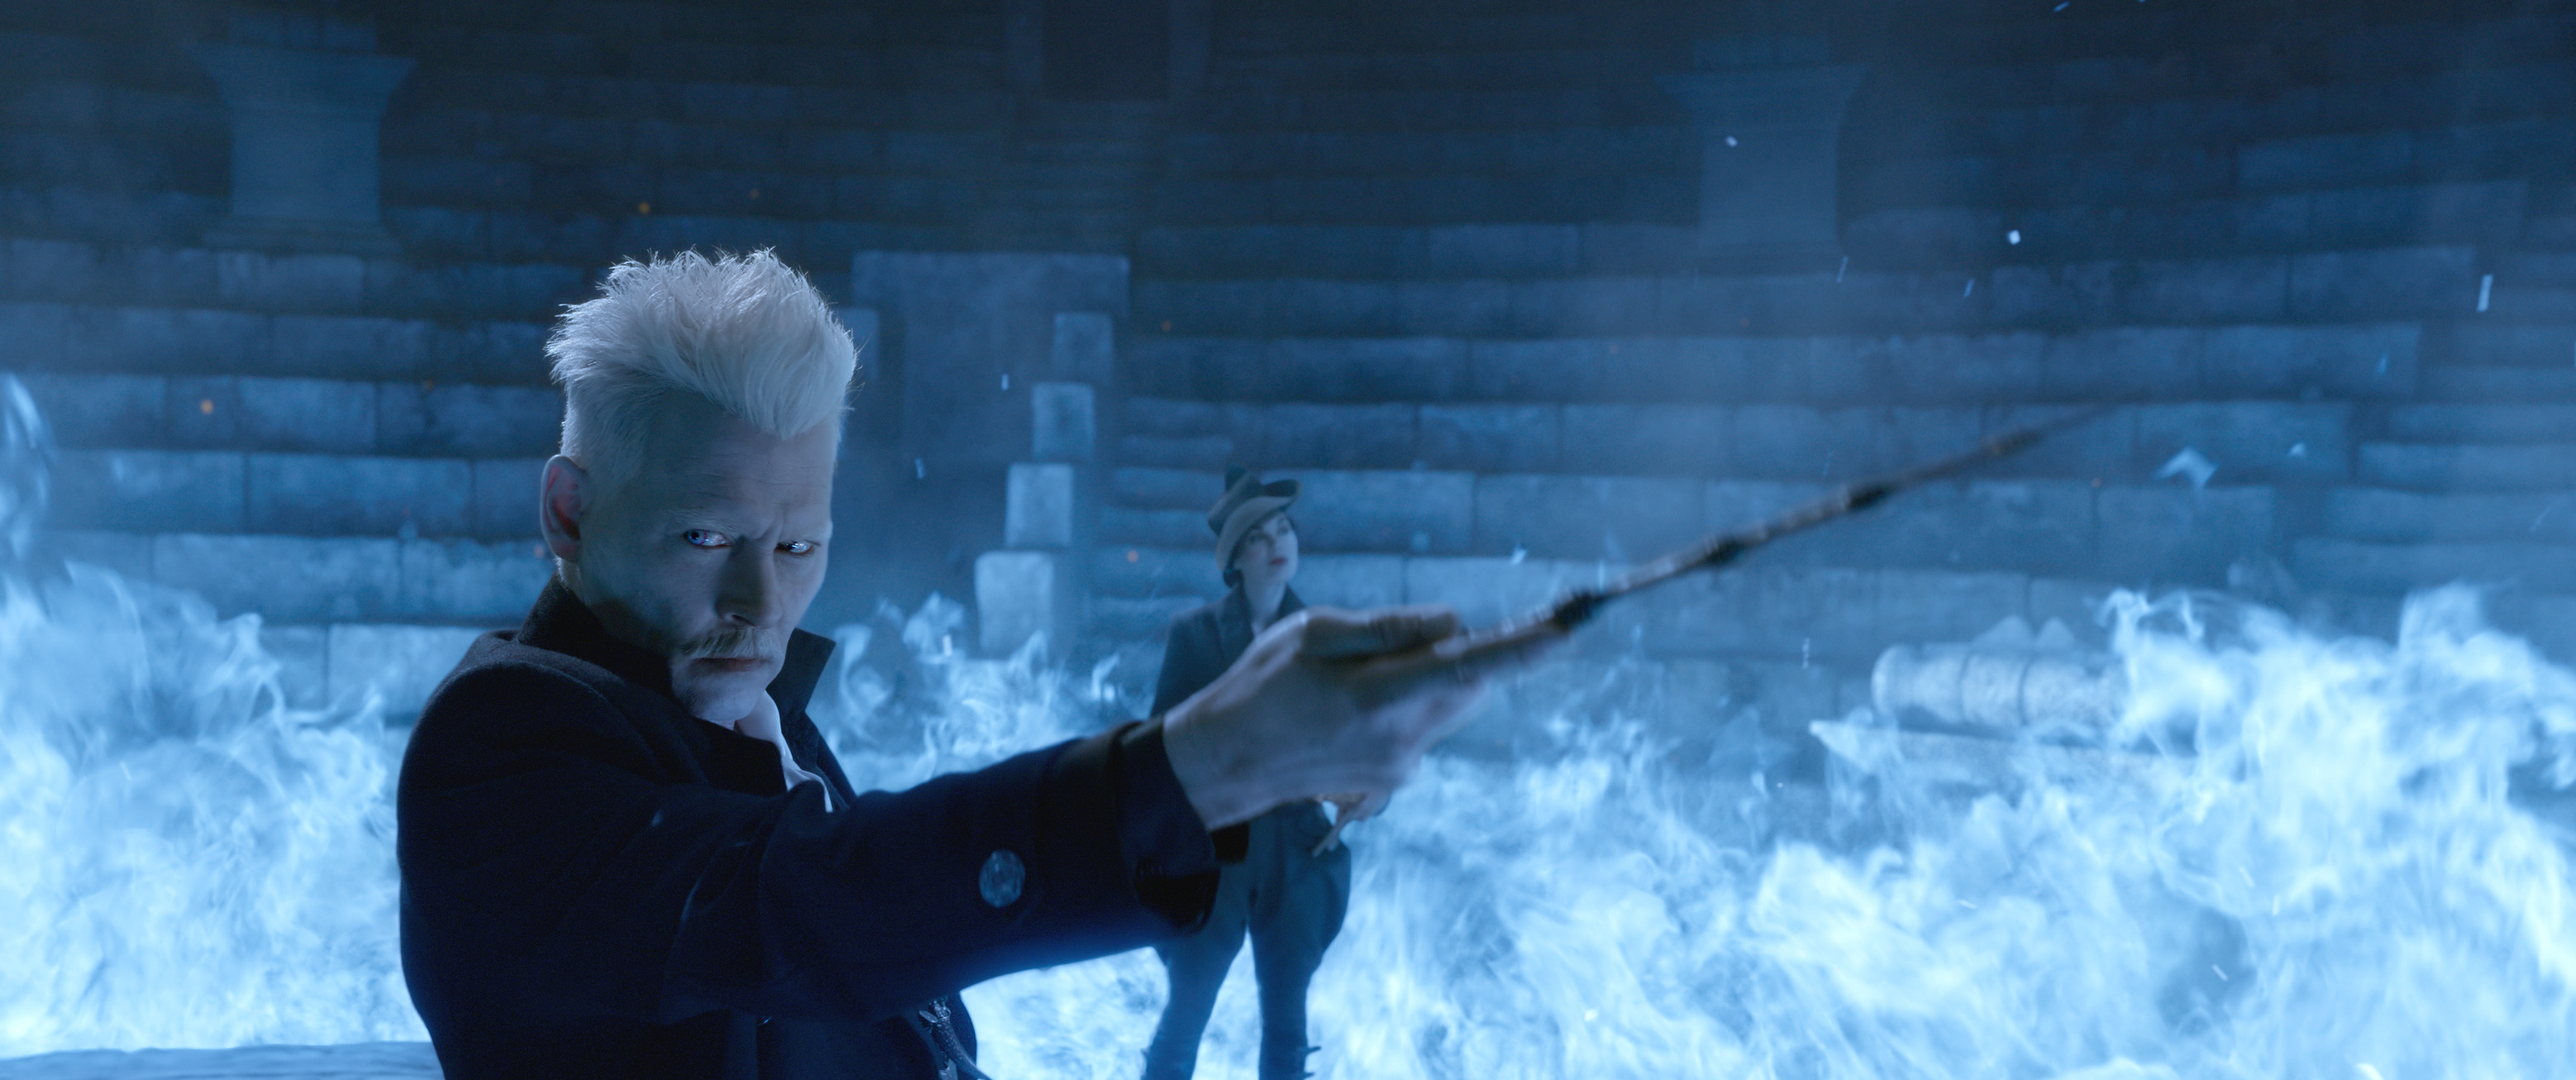 grindelwald and the elder wand